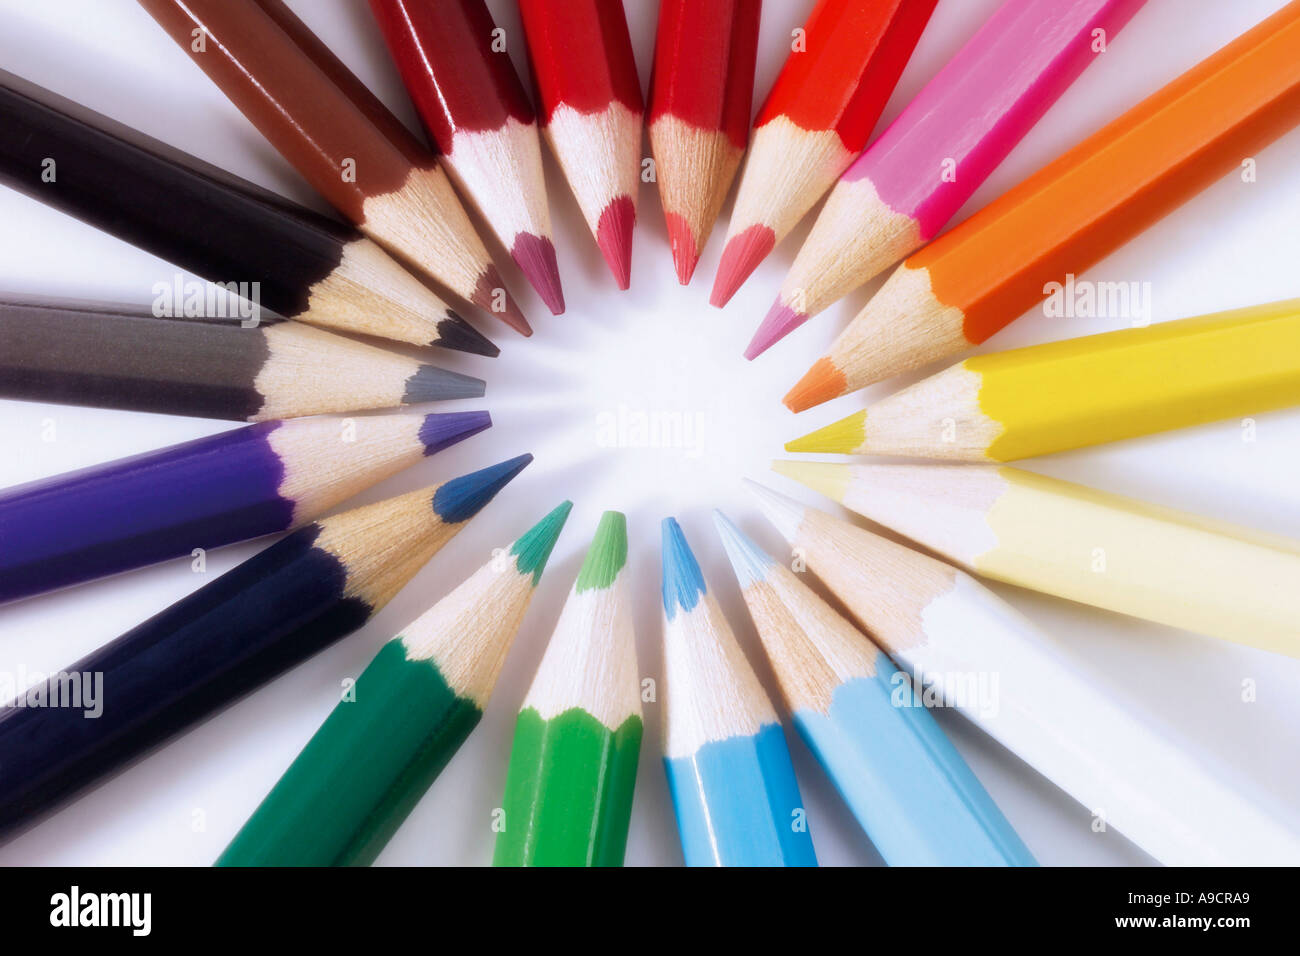 Colored pencils, elevated view Stock Photo